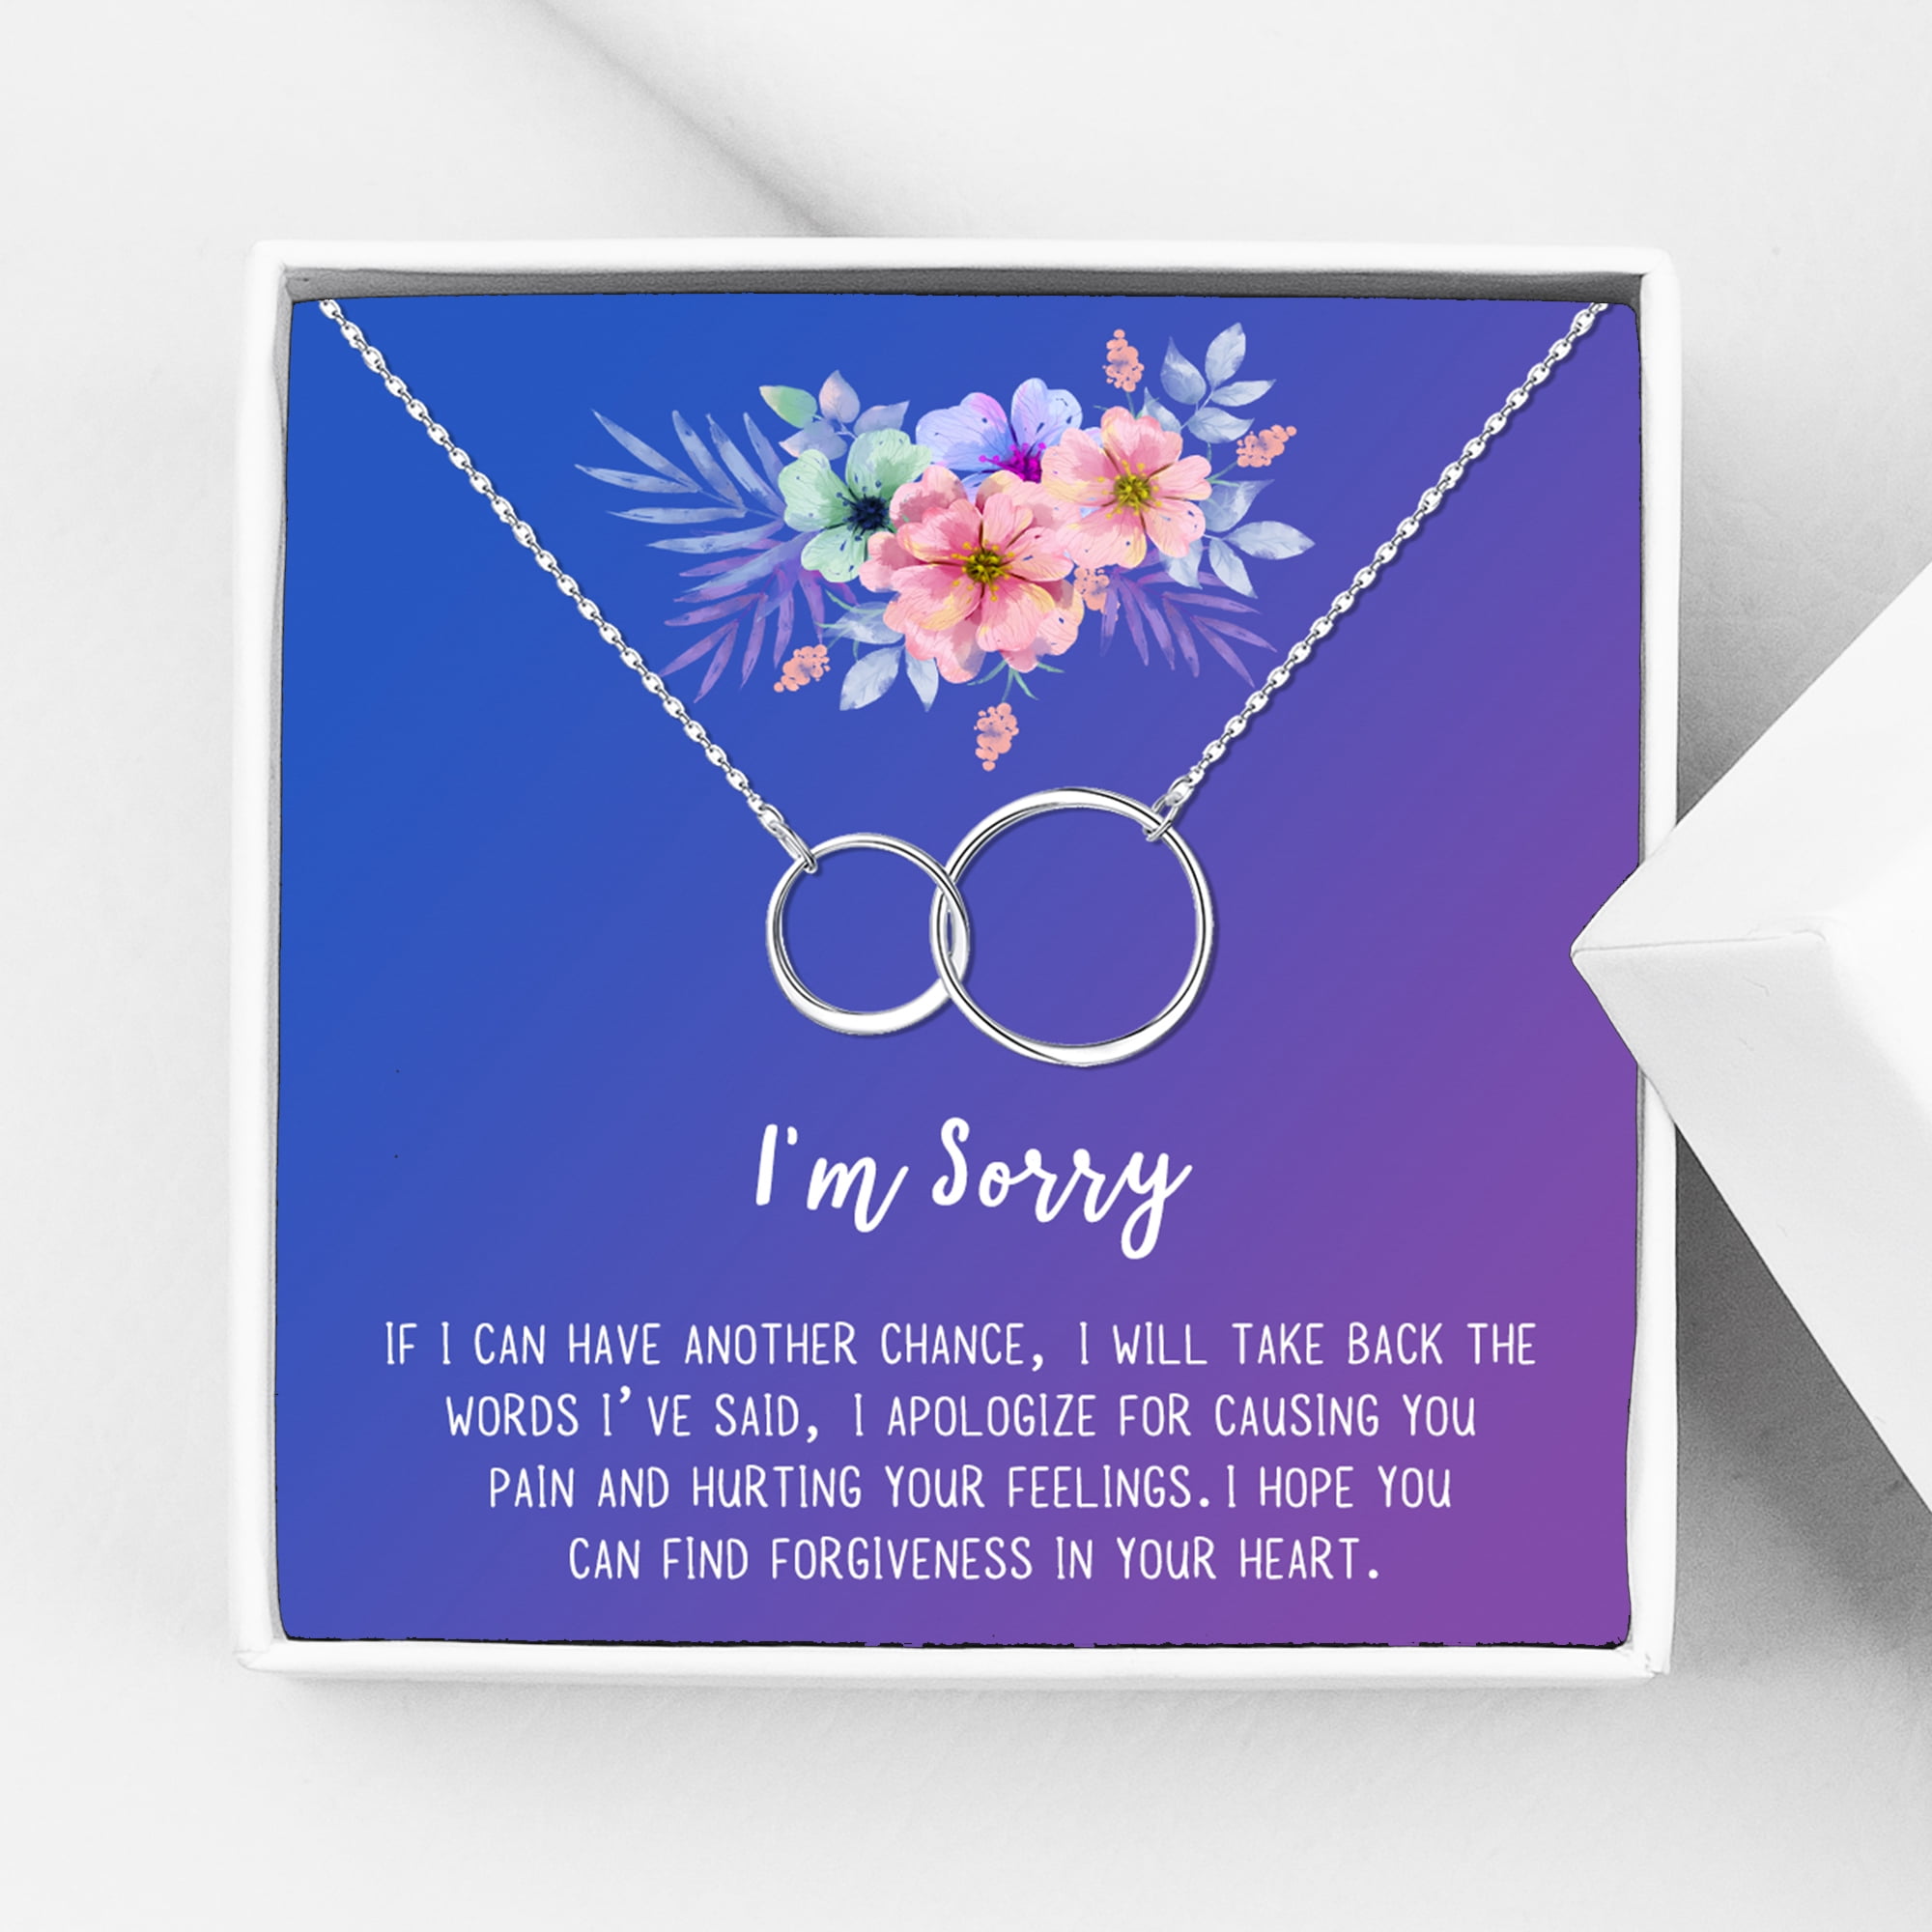 occasion gift Forgiveness necklace gift personalized gift friendship gifts Birthday gift appreciation gift love necklace